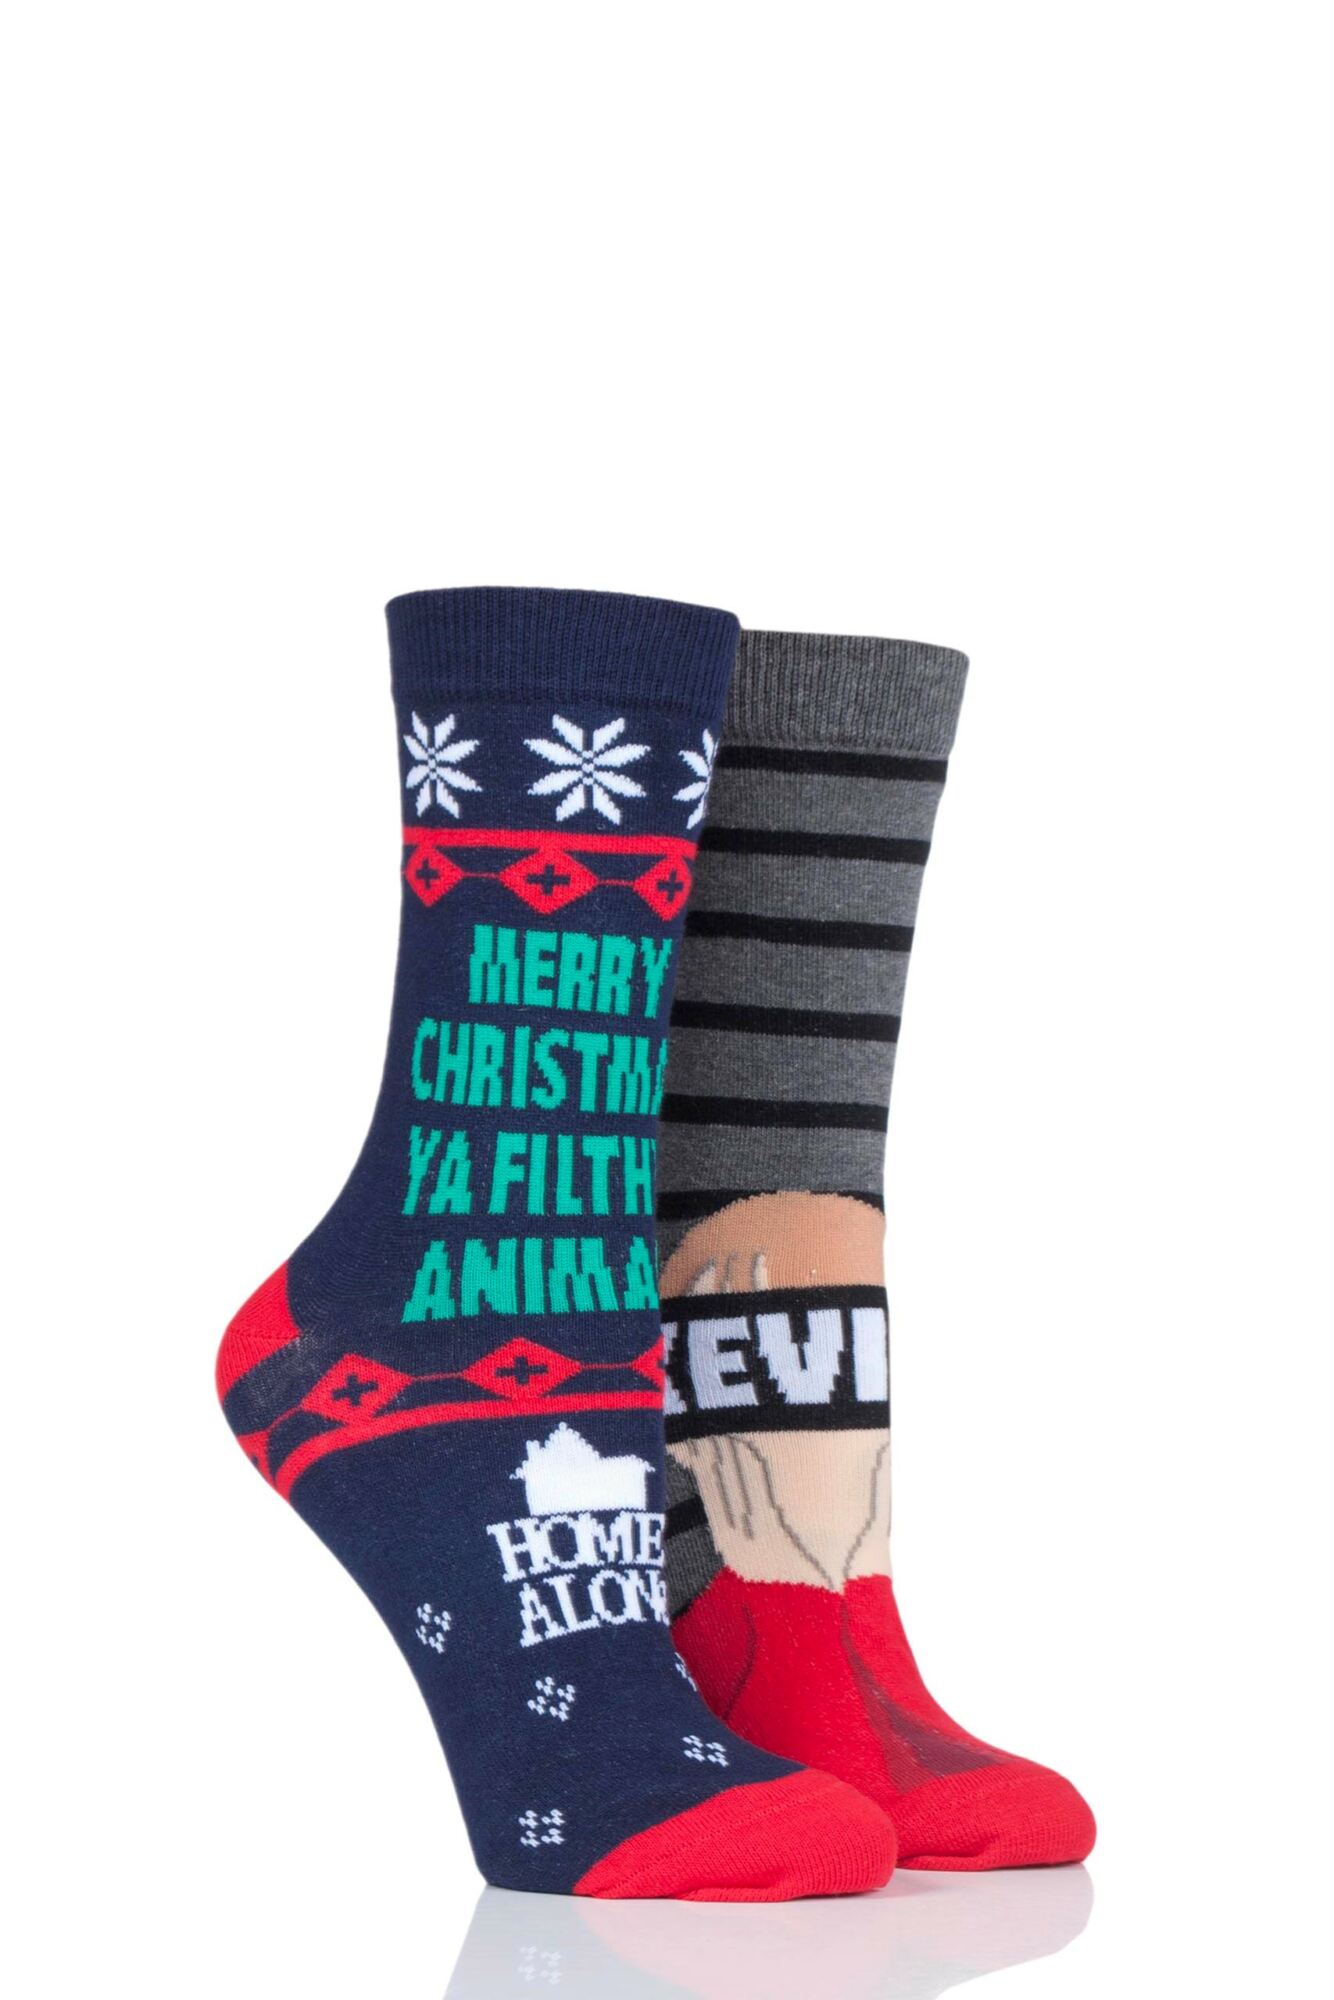 2 Pair Home Alone Merry Christmas Ya Filthy Animal Cotton Socks Unisex - Film & TV Characters